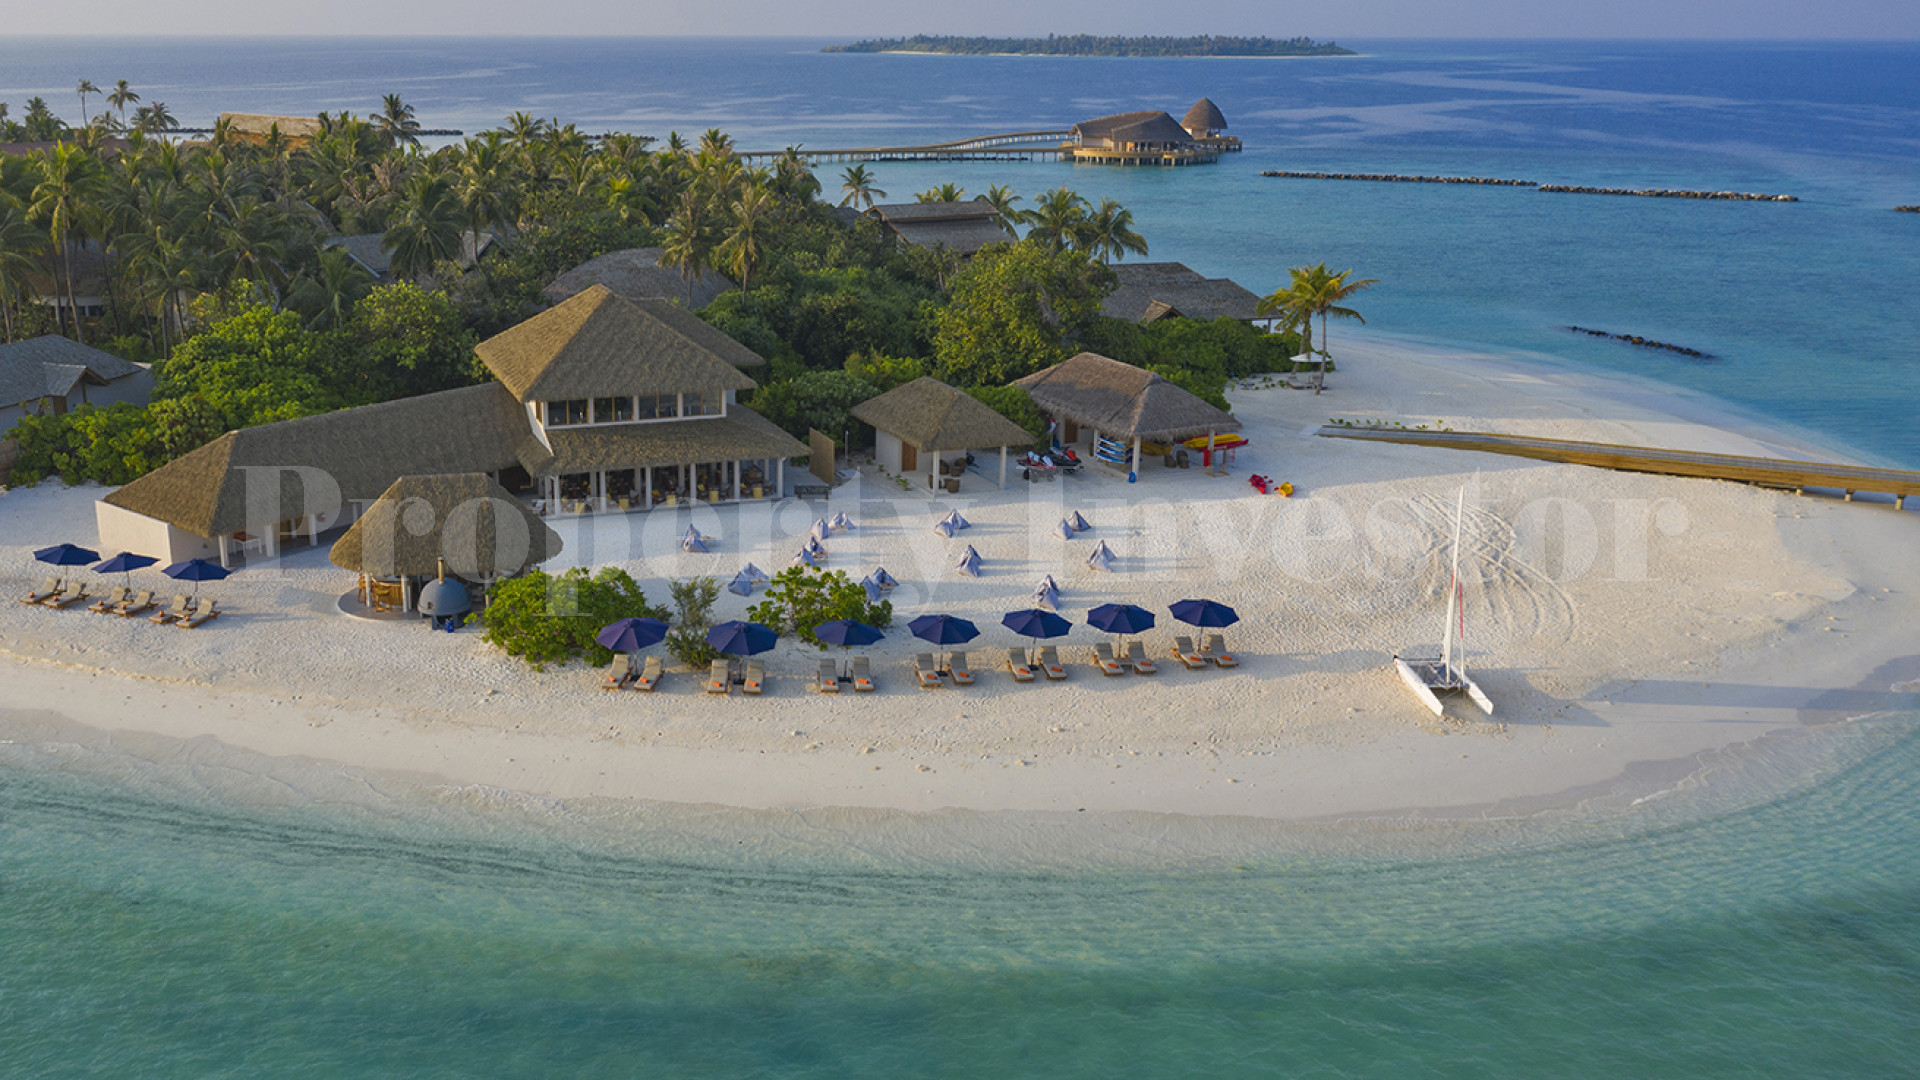 Reputable 5* Star 80 Room Luxury Island Resort for Sale in the Maldives